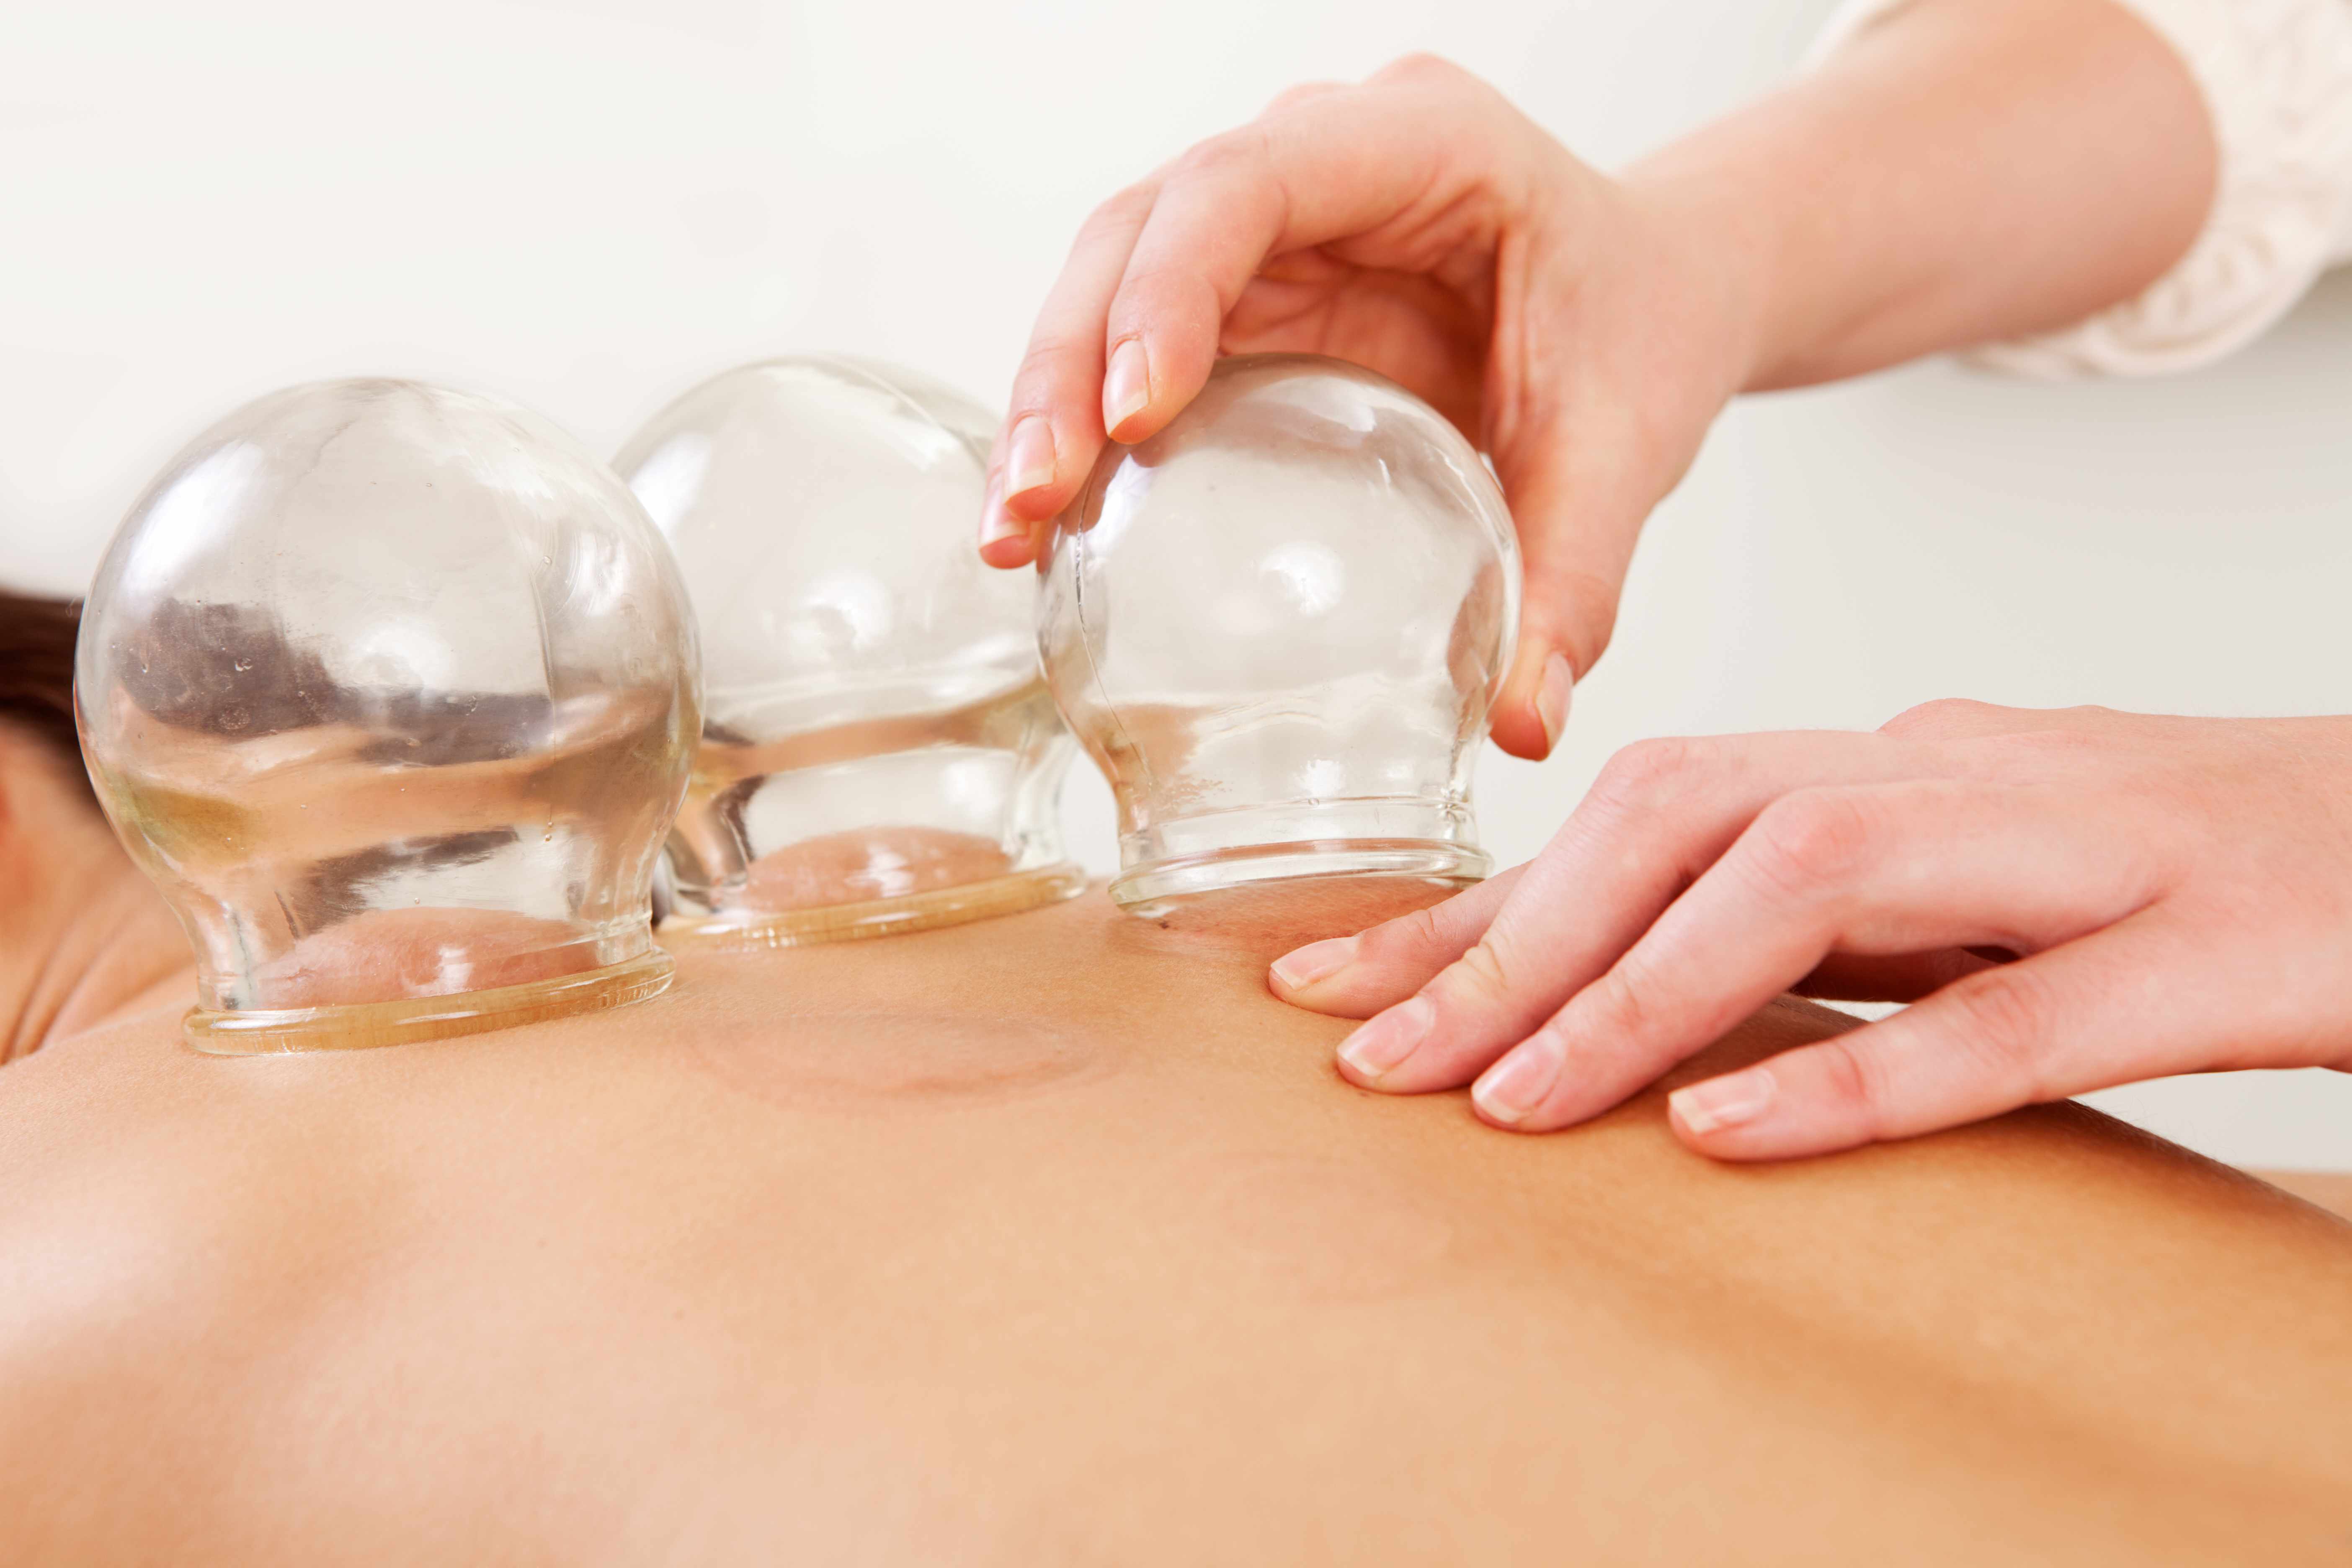 a person doing cupping therapy on someone's back